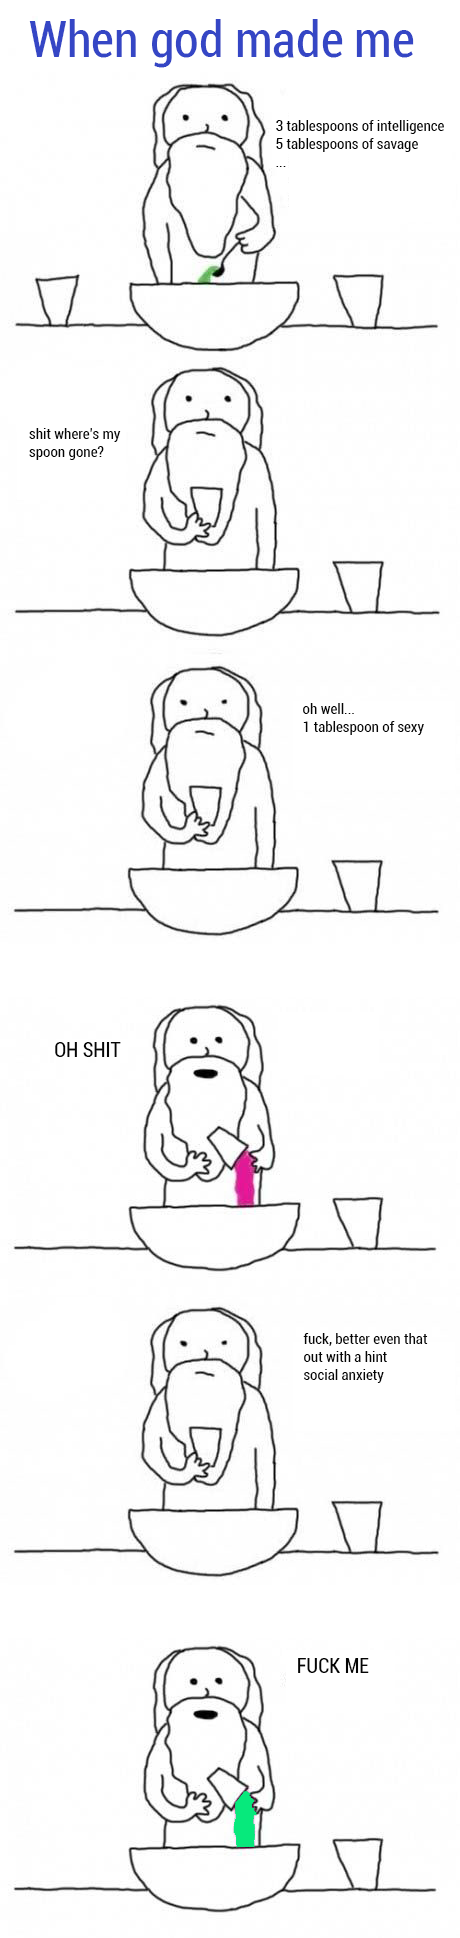 When god made me...